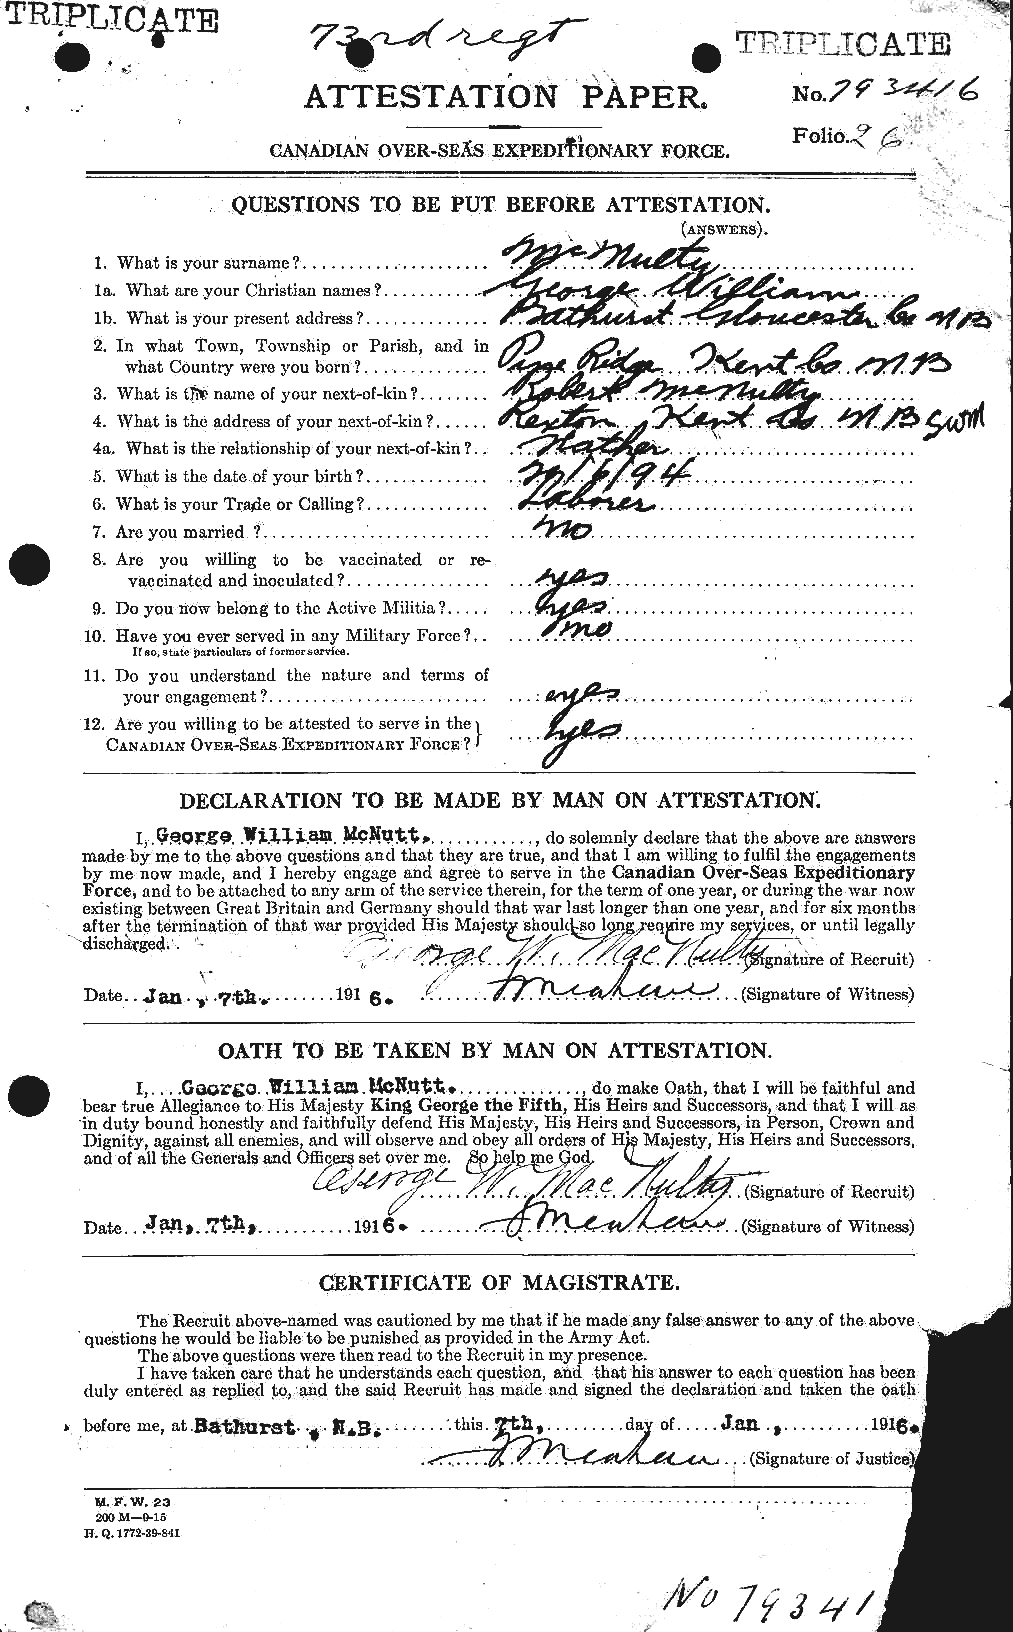 Personnel Records of the First World War - CEF 541910a